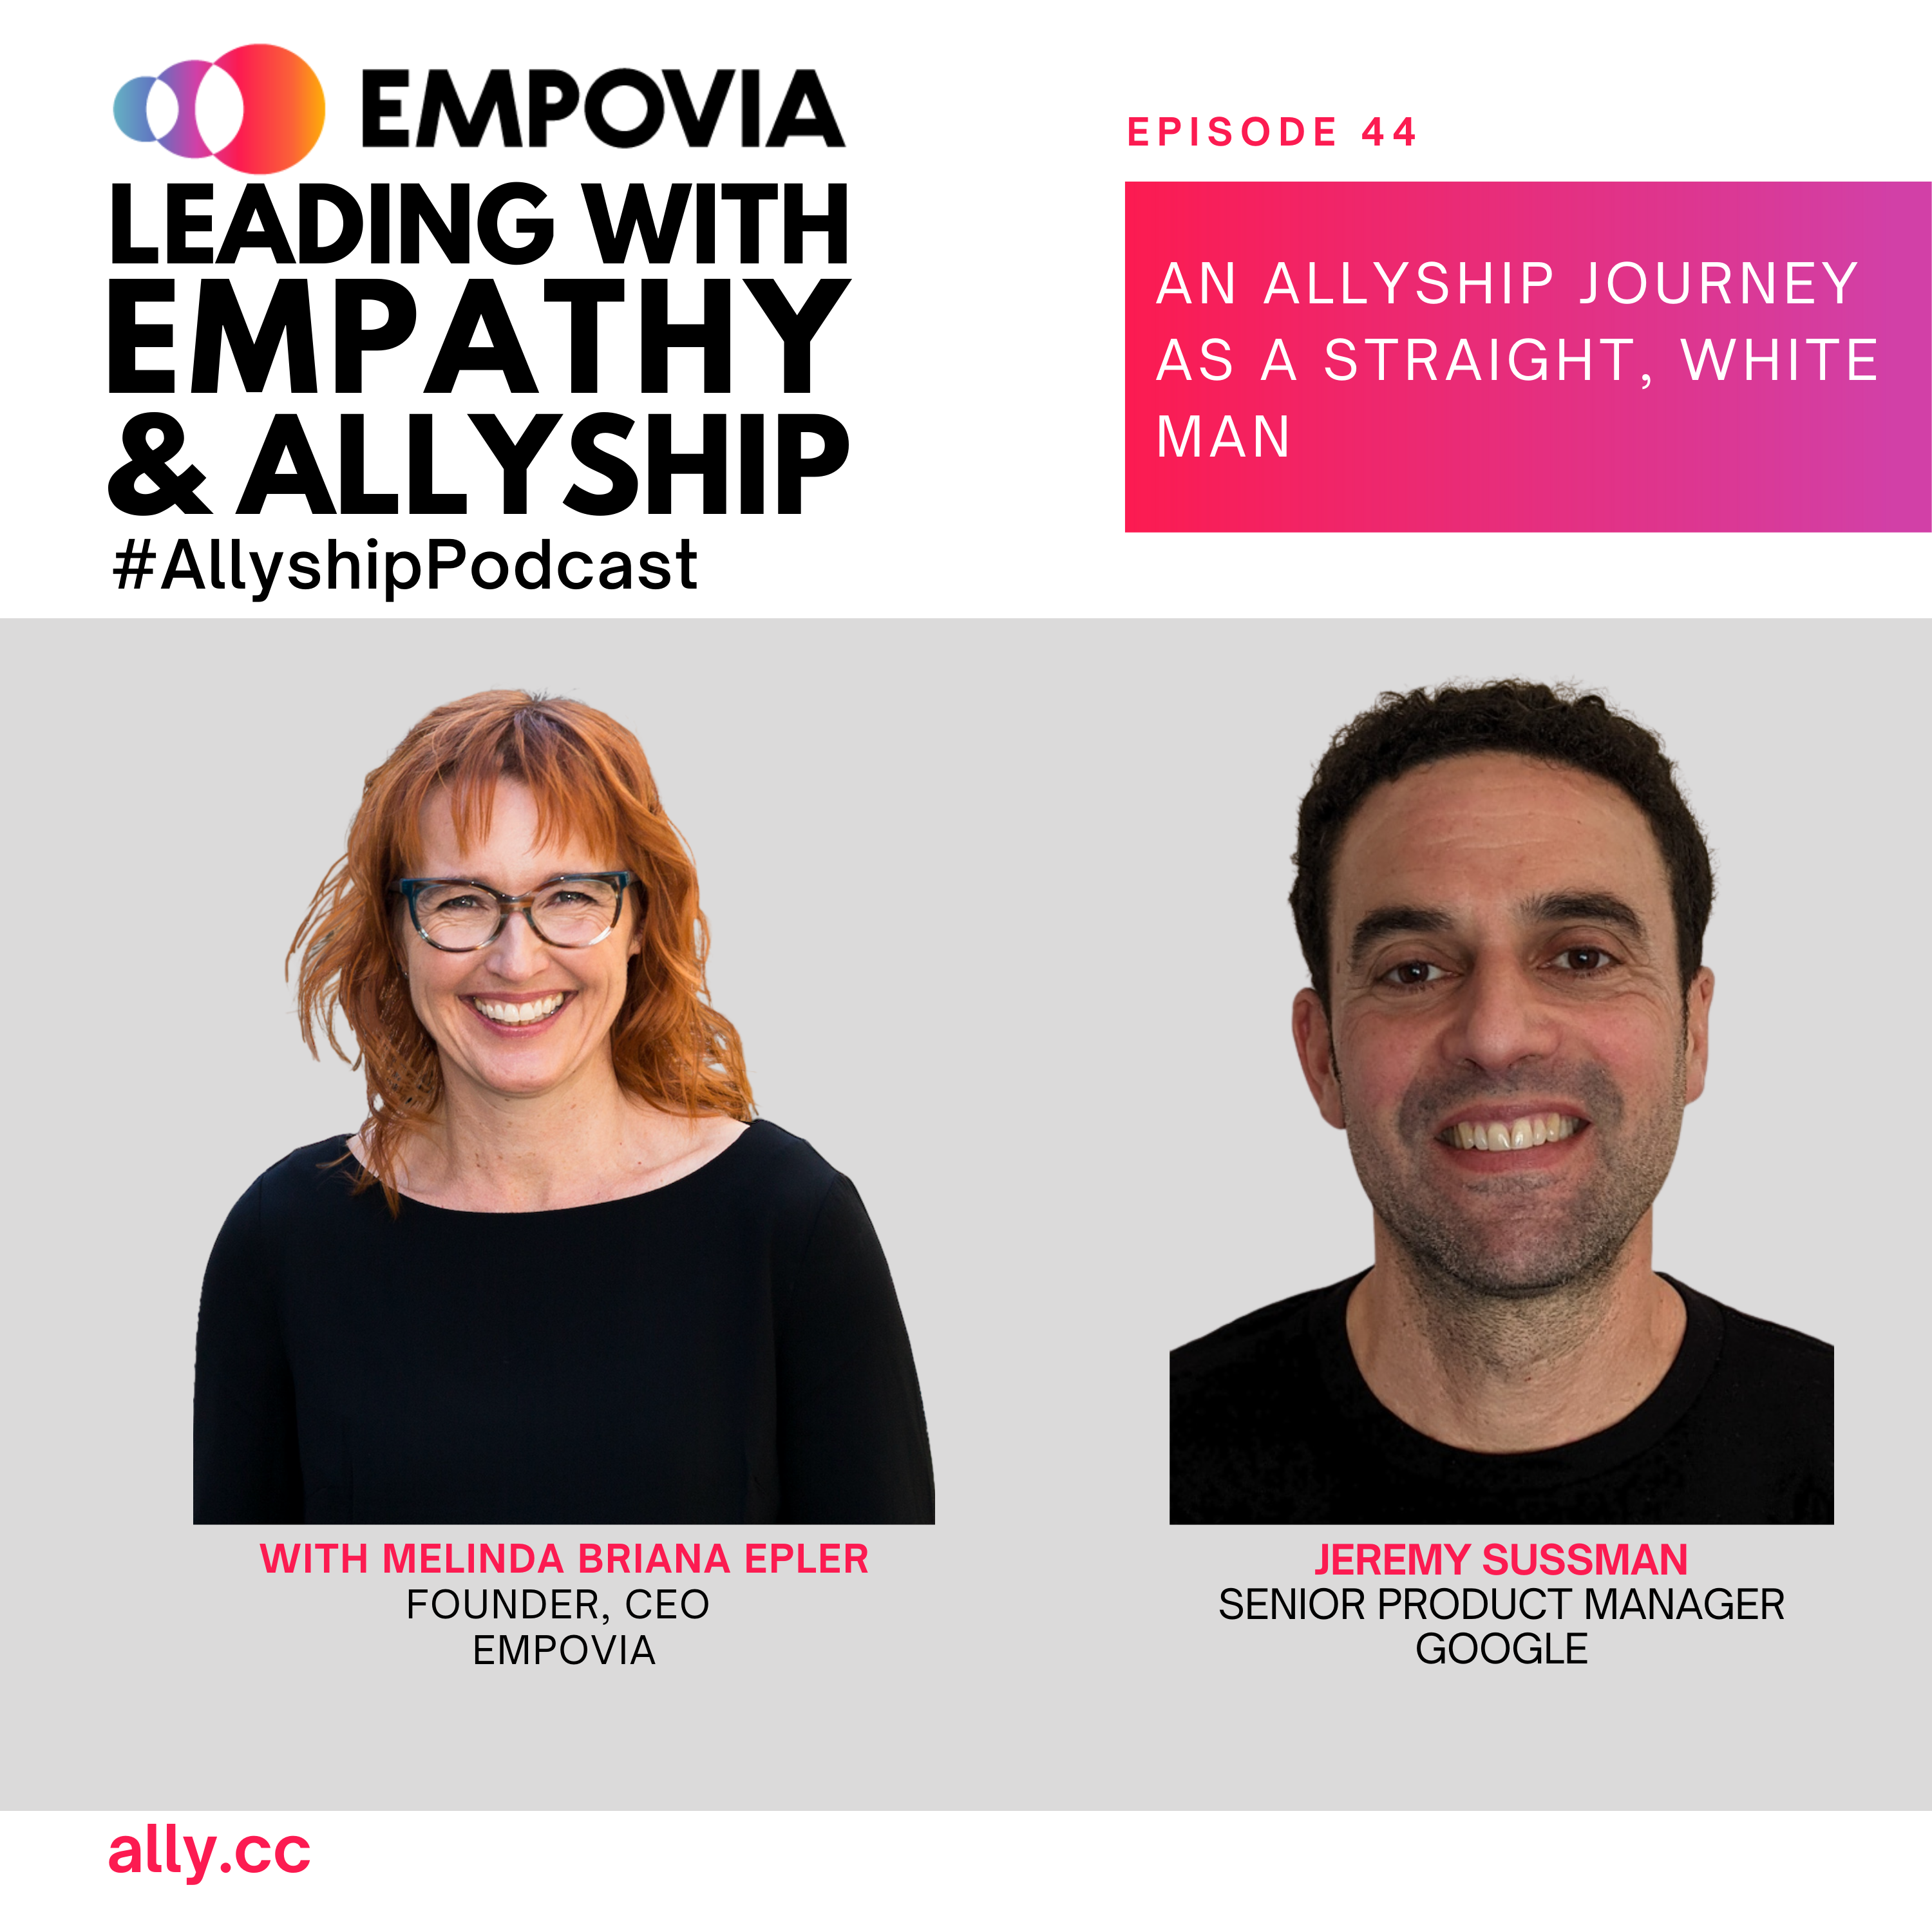 Leading With Empathy & Allyship promo with the Empovia logo and photos of host Melinda Briana Epler, a White woman with red hair and glasses, and Jeremy Sussman, a White man with short black hair and a black shirt.